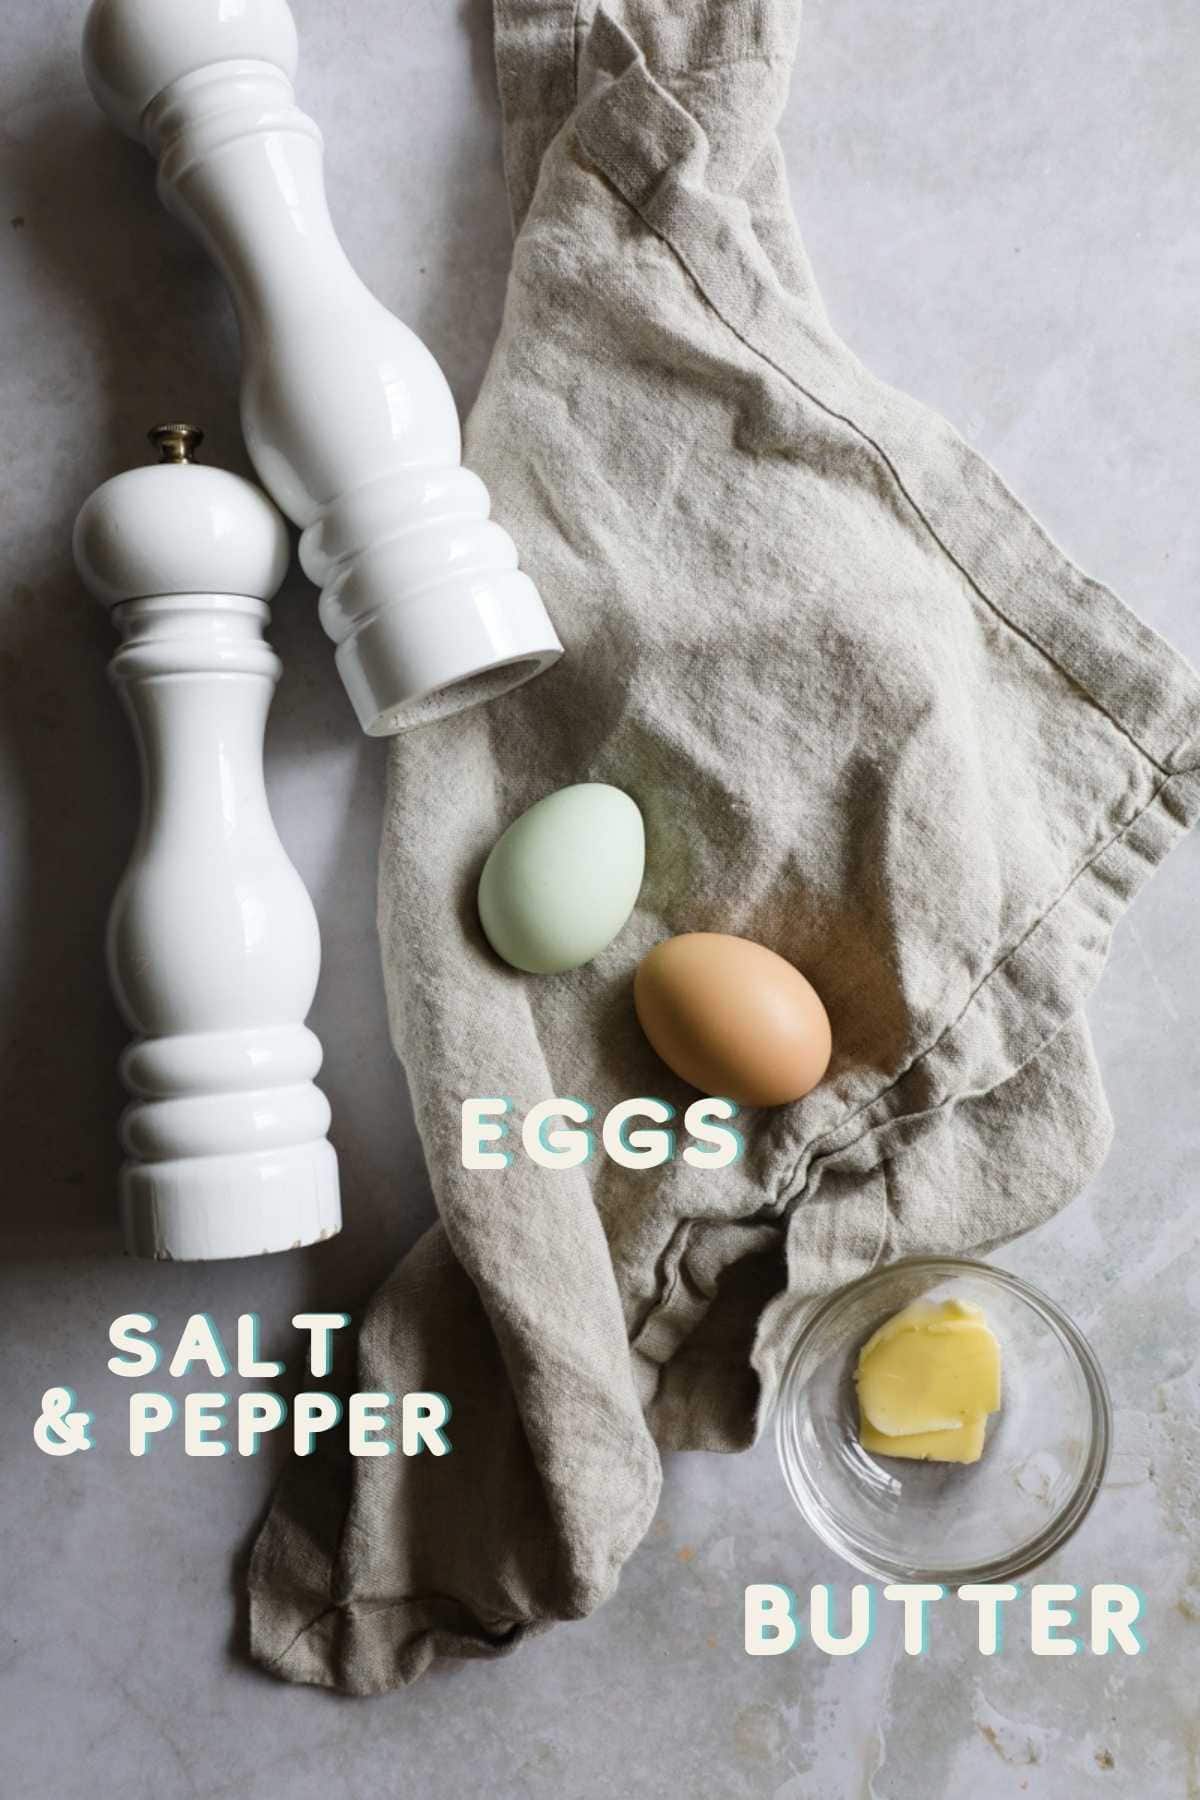 Ingredients to make sunny side up eggs, including pasture raised eggs, butter, salt, and pepper.